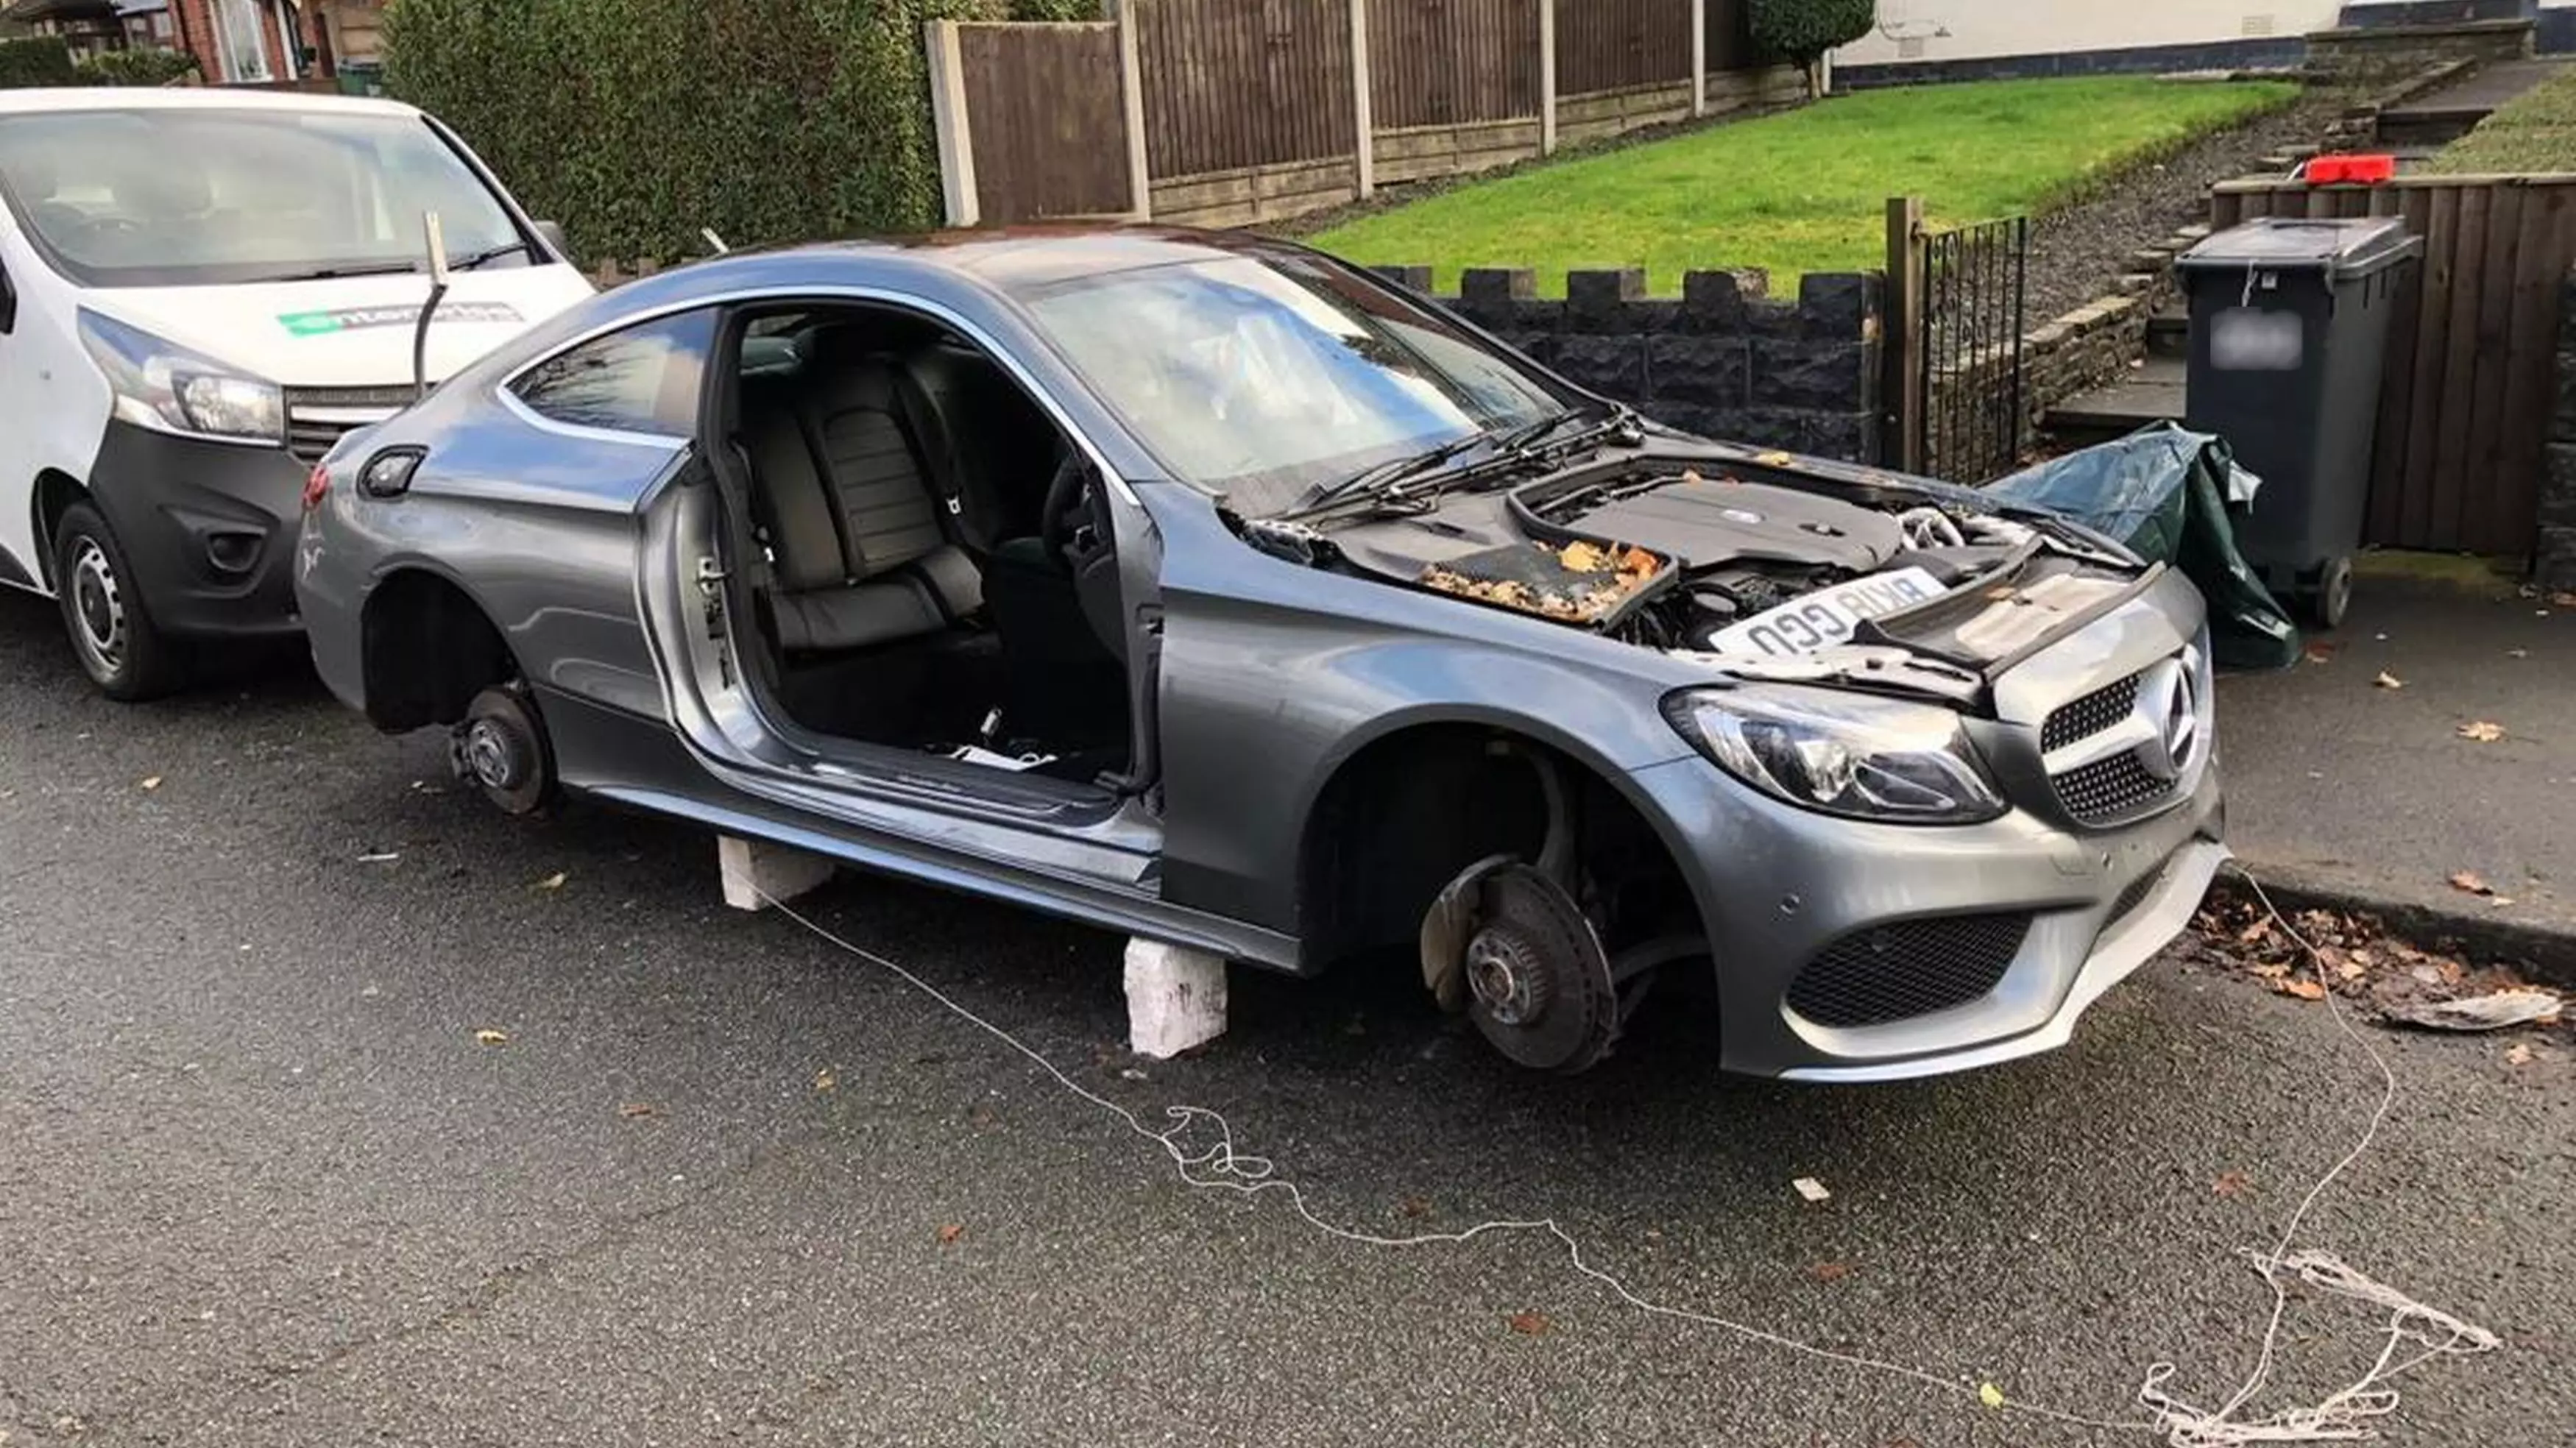 Thieves Completely Strip Mercedes Outside Owner's Home